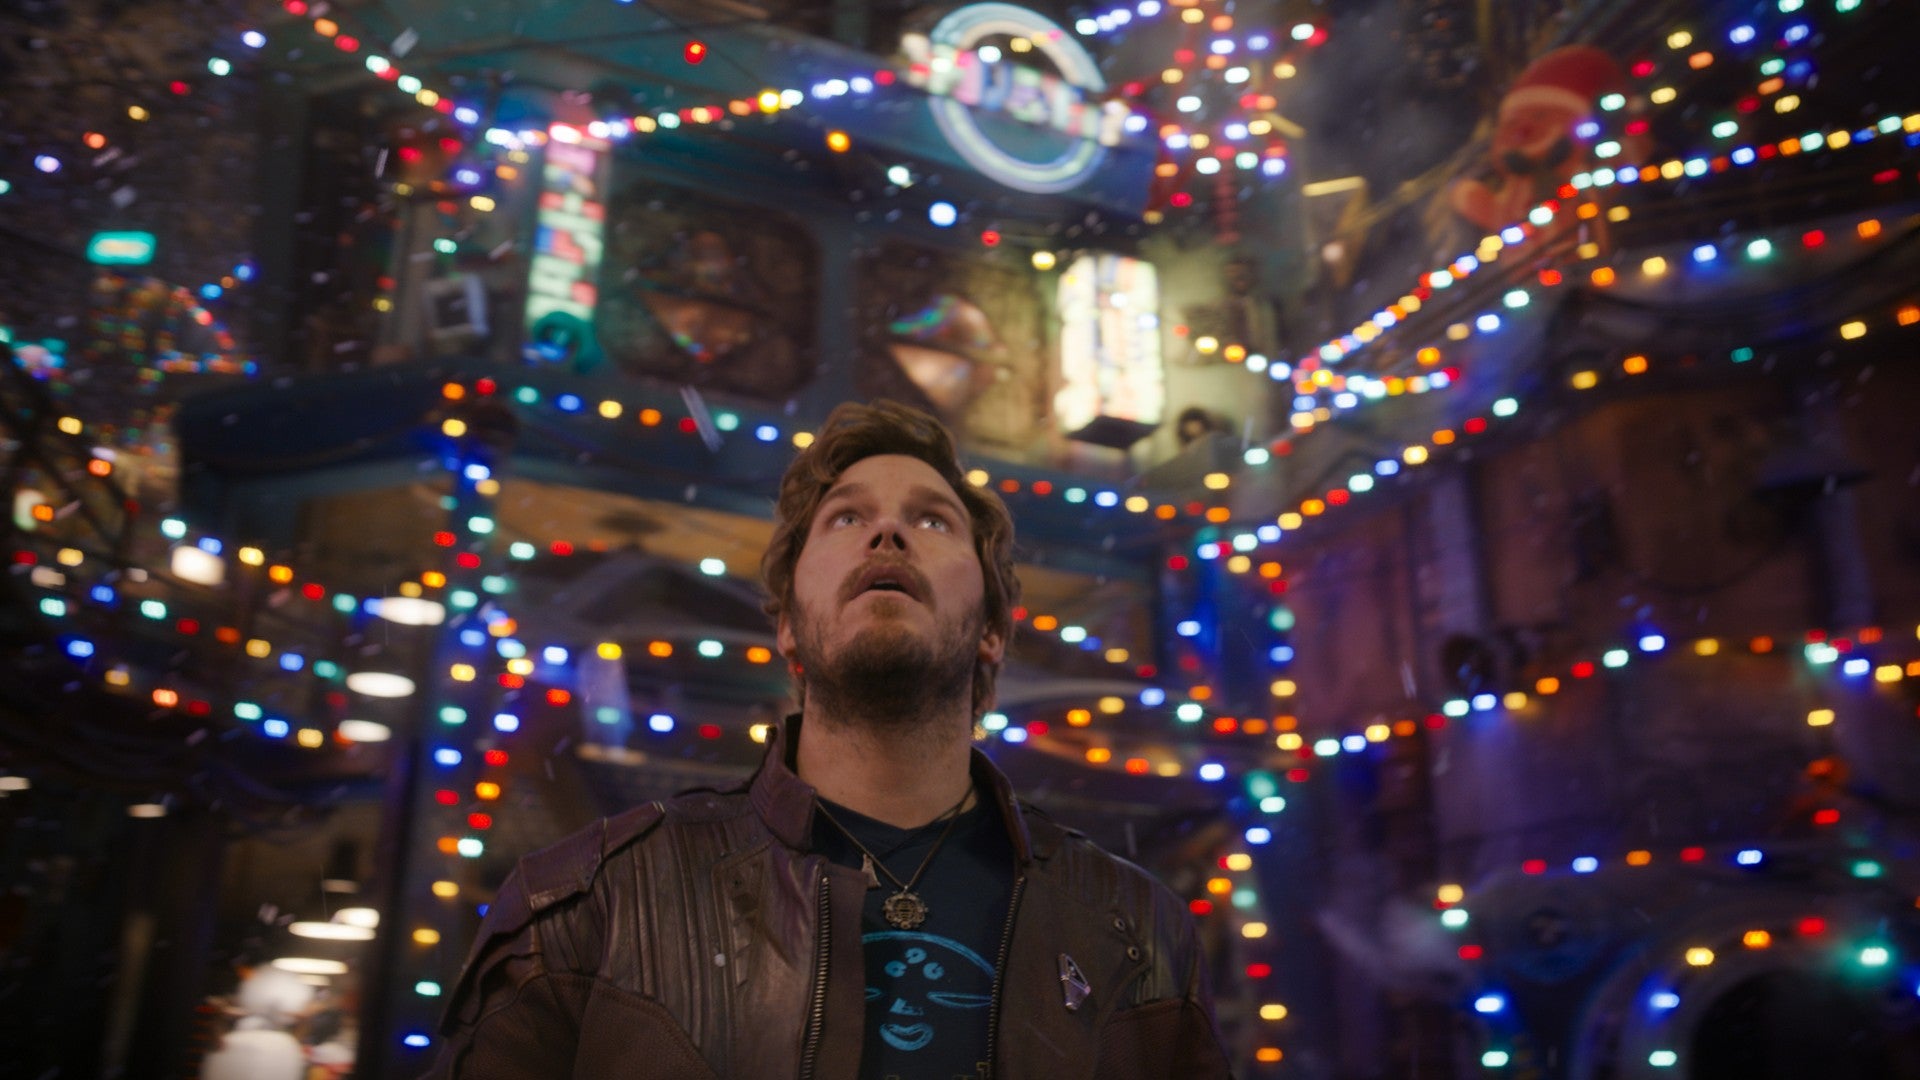 Peter Quill marveling at the magic of Christmas. (Image: Marvel Studios)